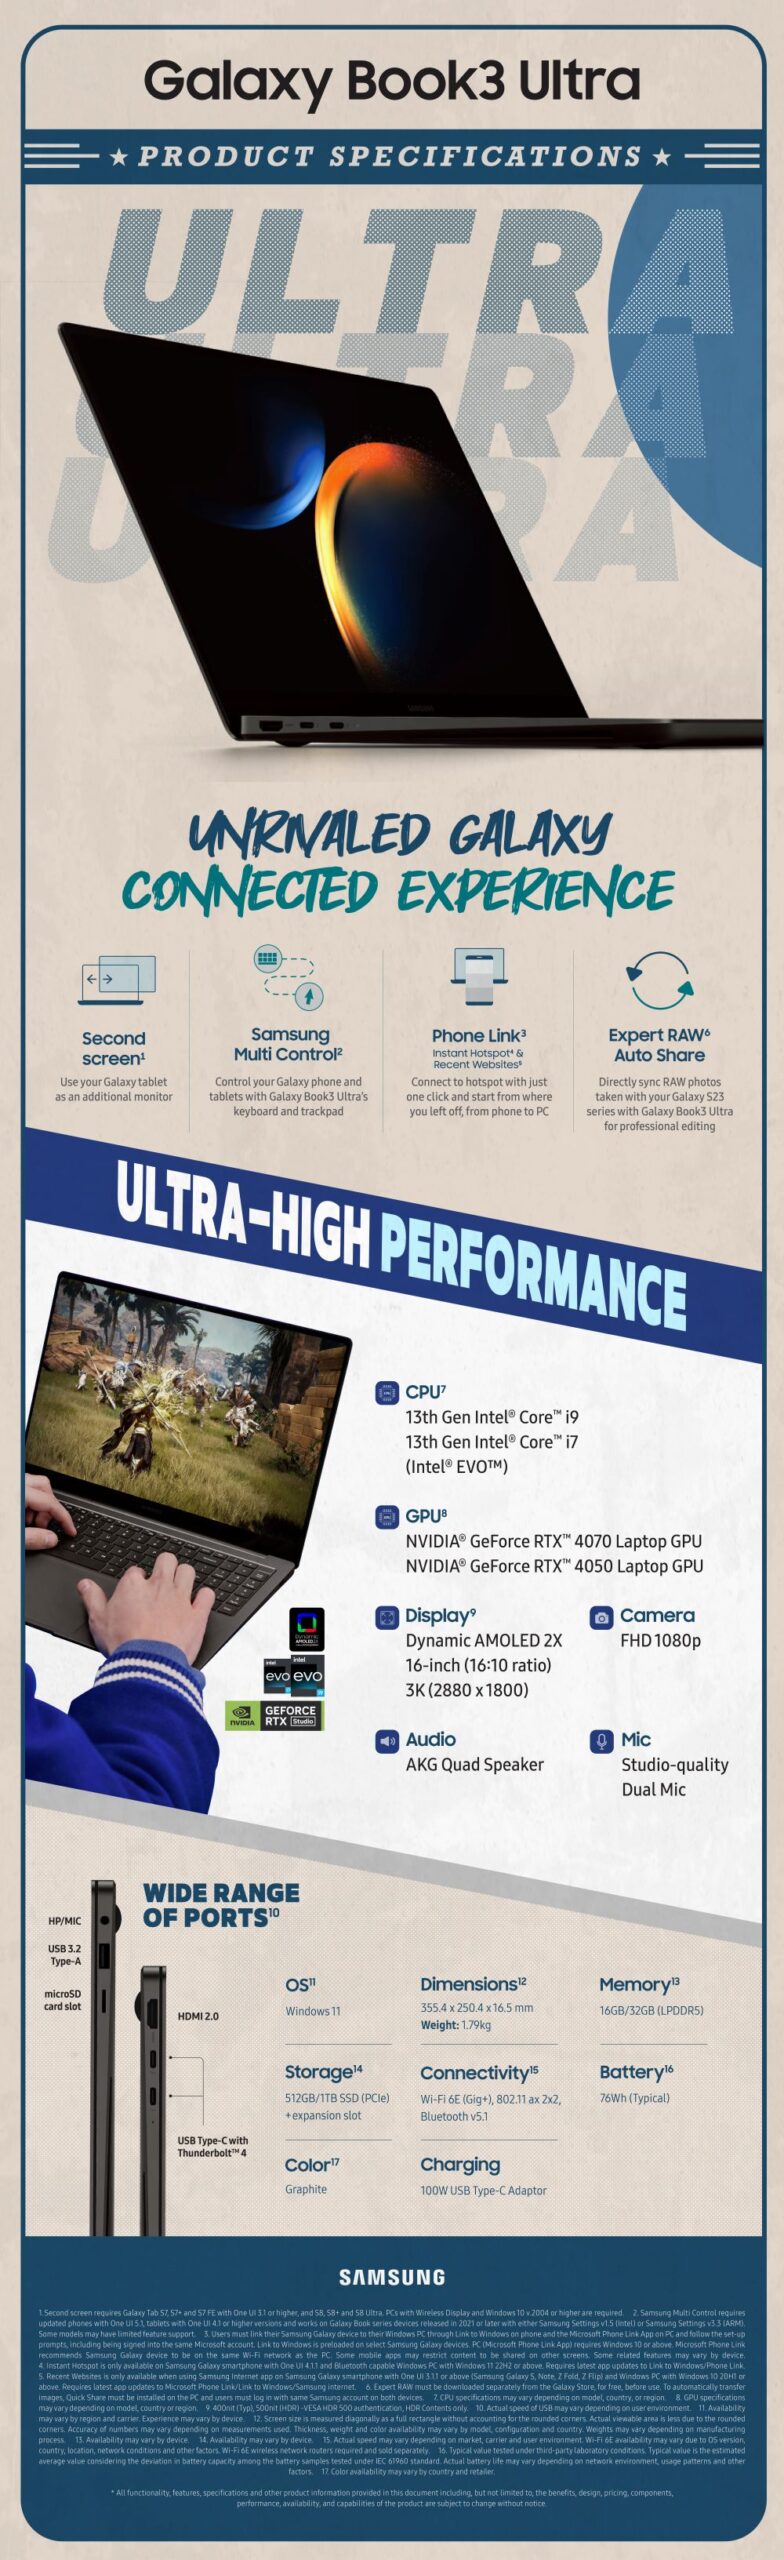 Galaxy Book3 Ultra infographic